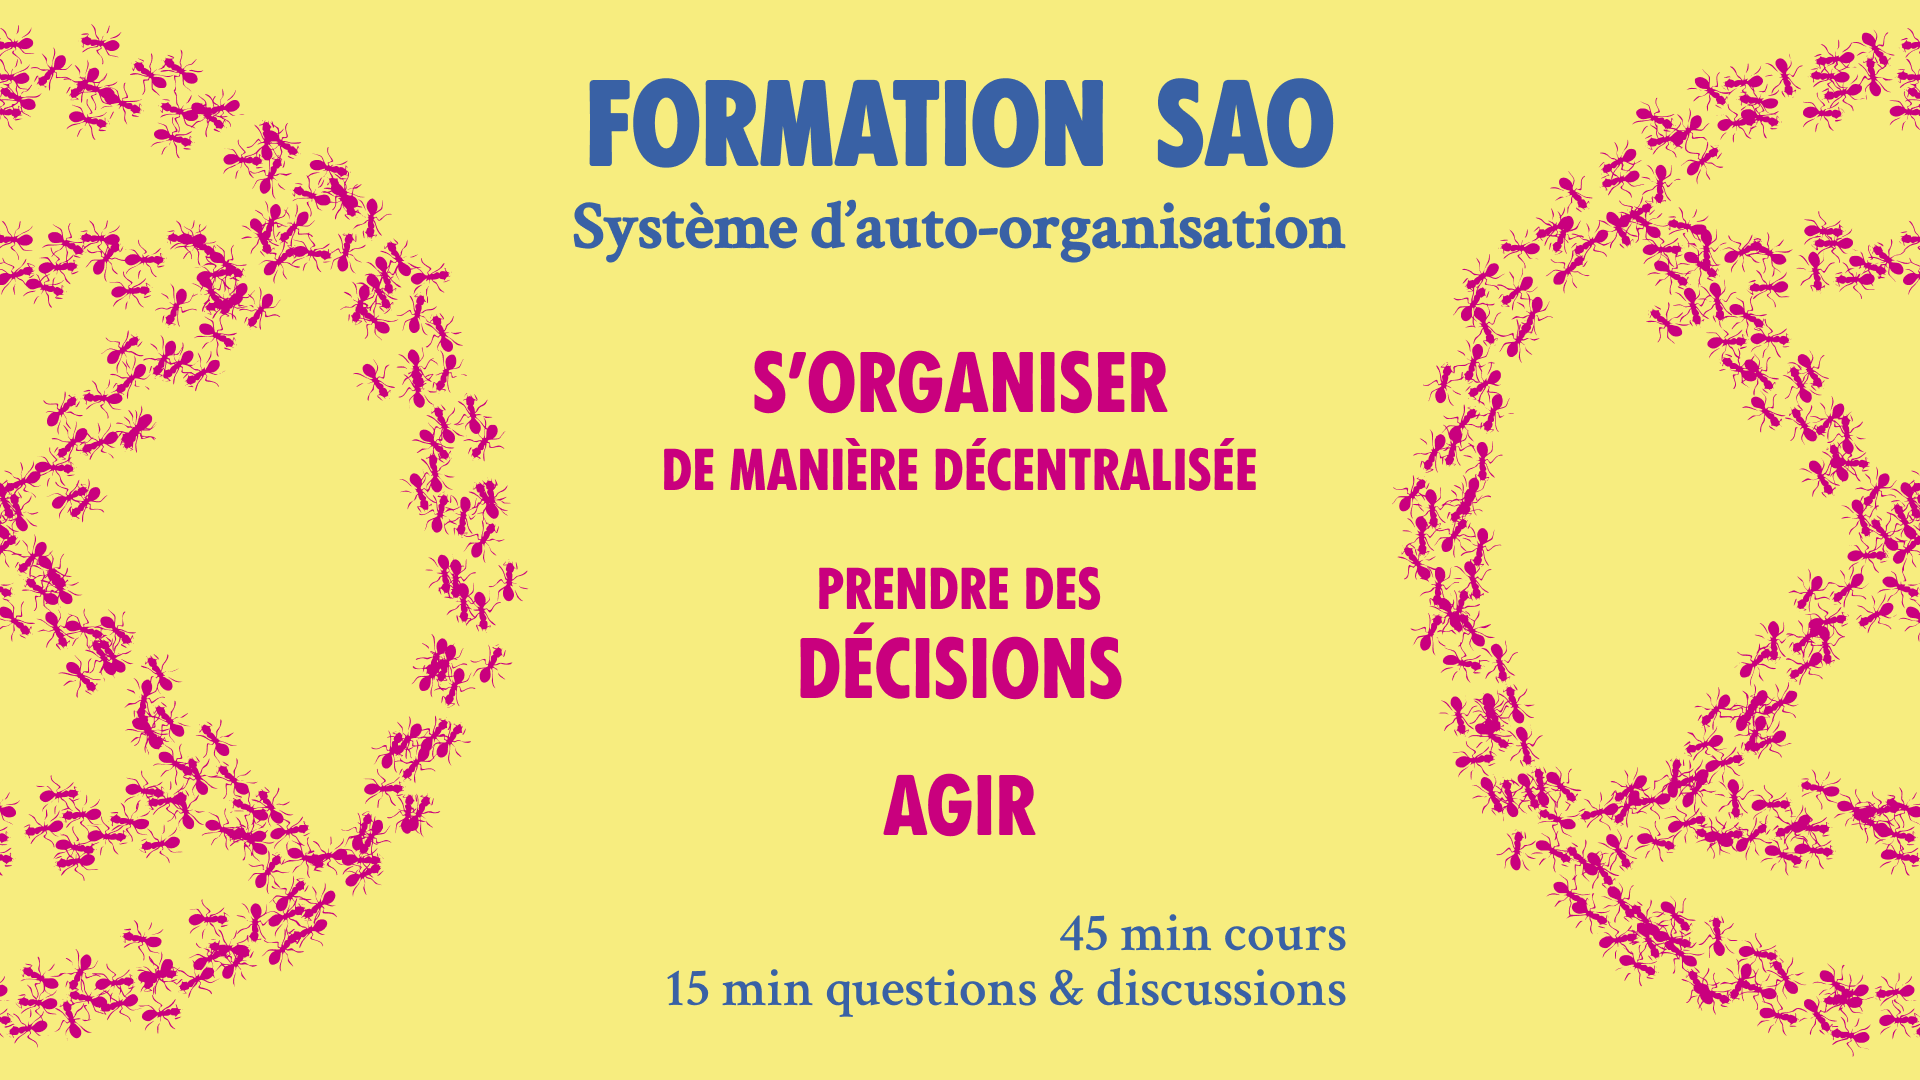 Formation SAO – Système d’auto-organisation